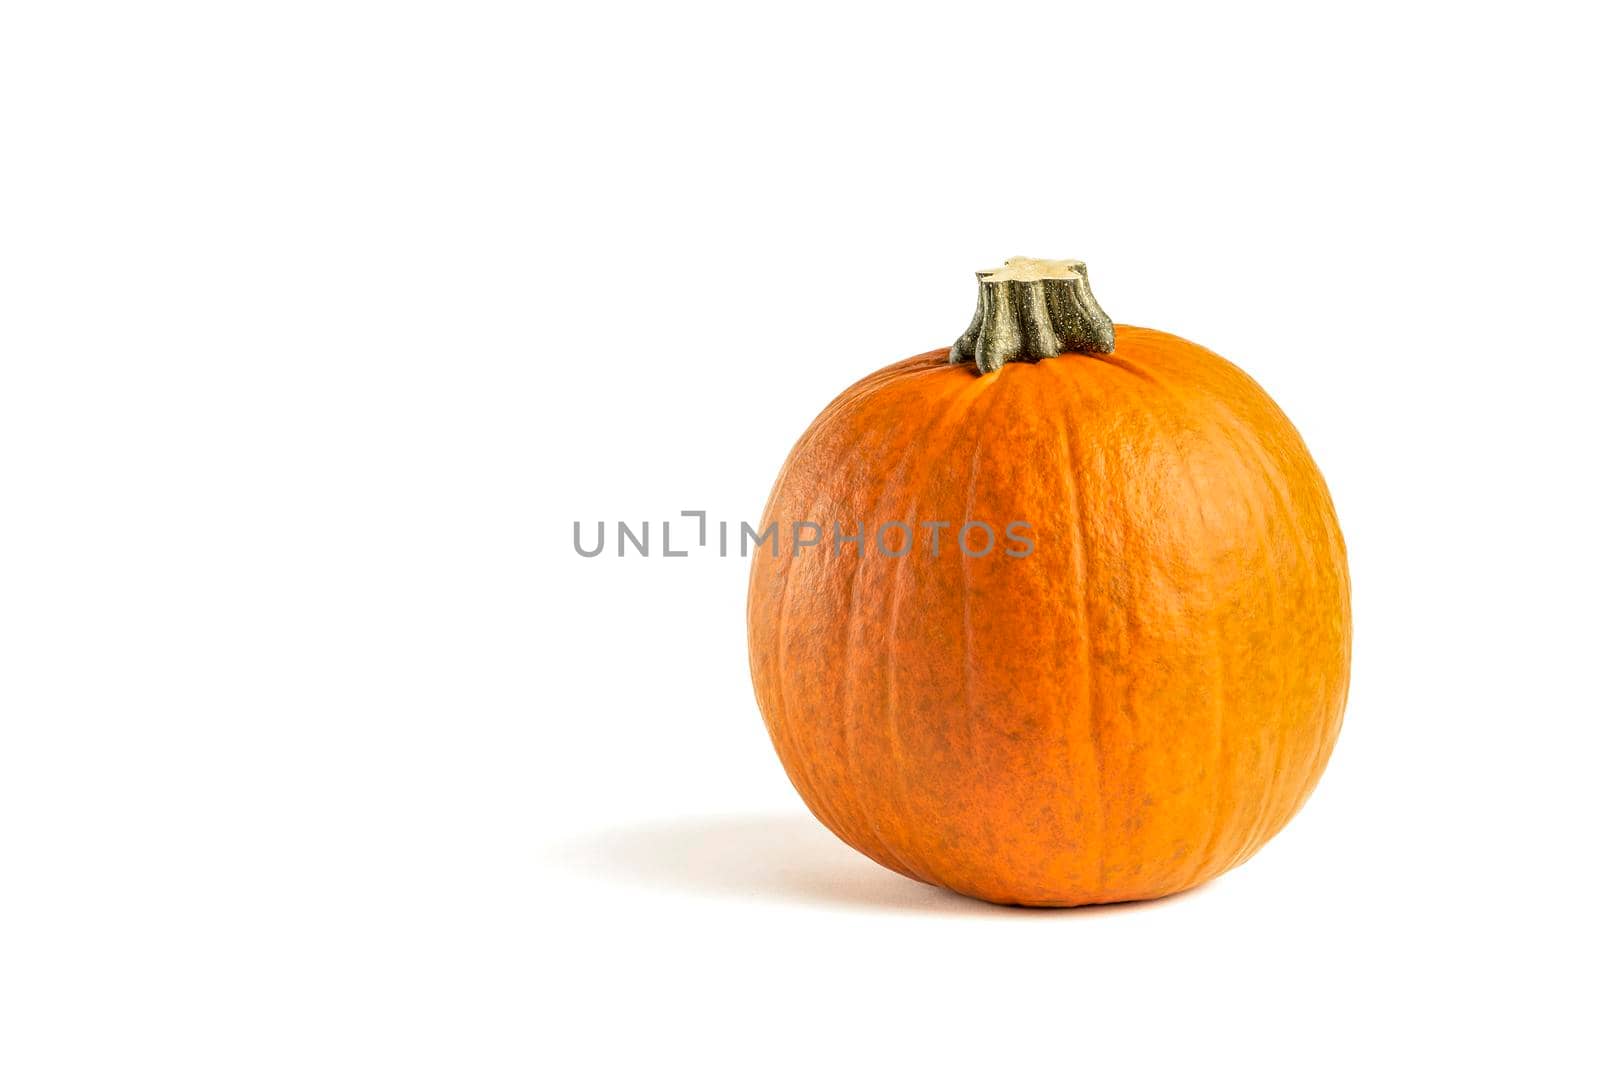 Pumpkin on a white background. Isolated halloween pumpkin isolate on white to insert into your project or design. One orange pumpkin casts a shadow.